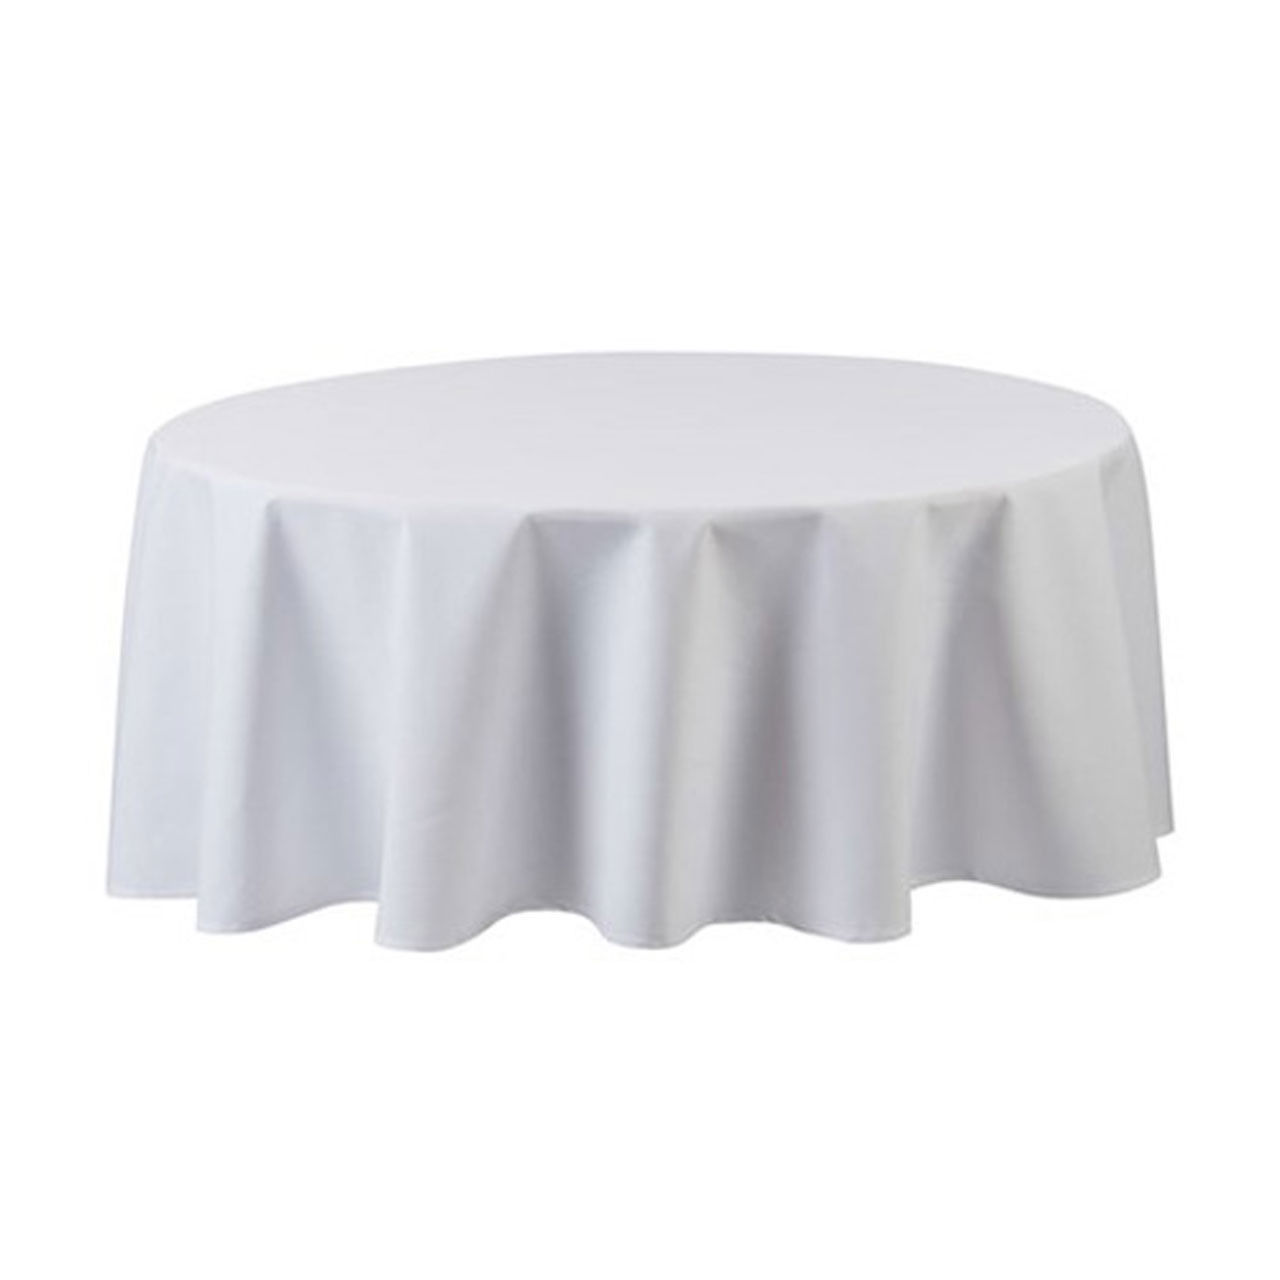 What is the finish on the Seamless White 120 round tablecloth?